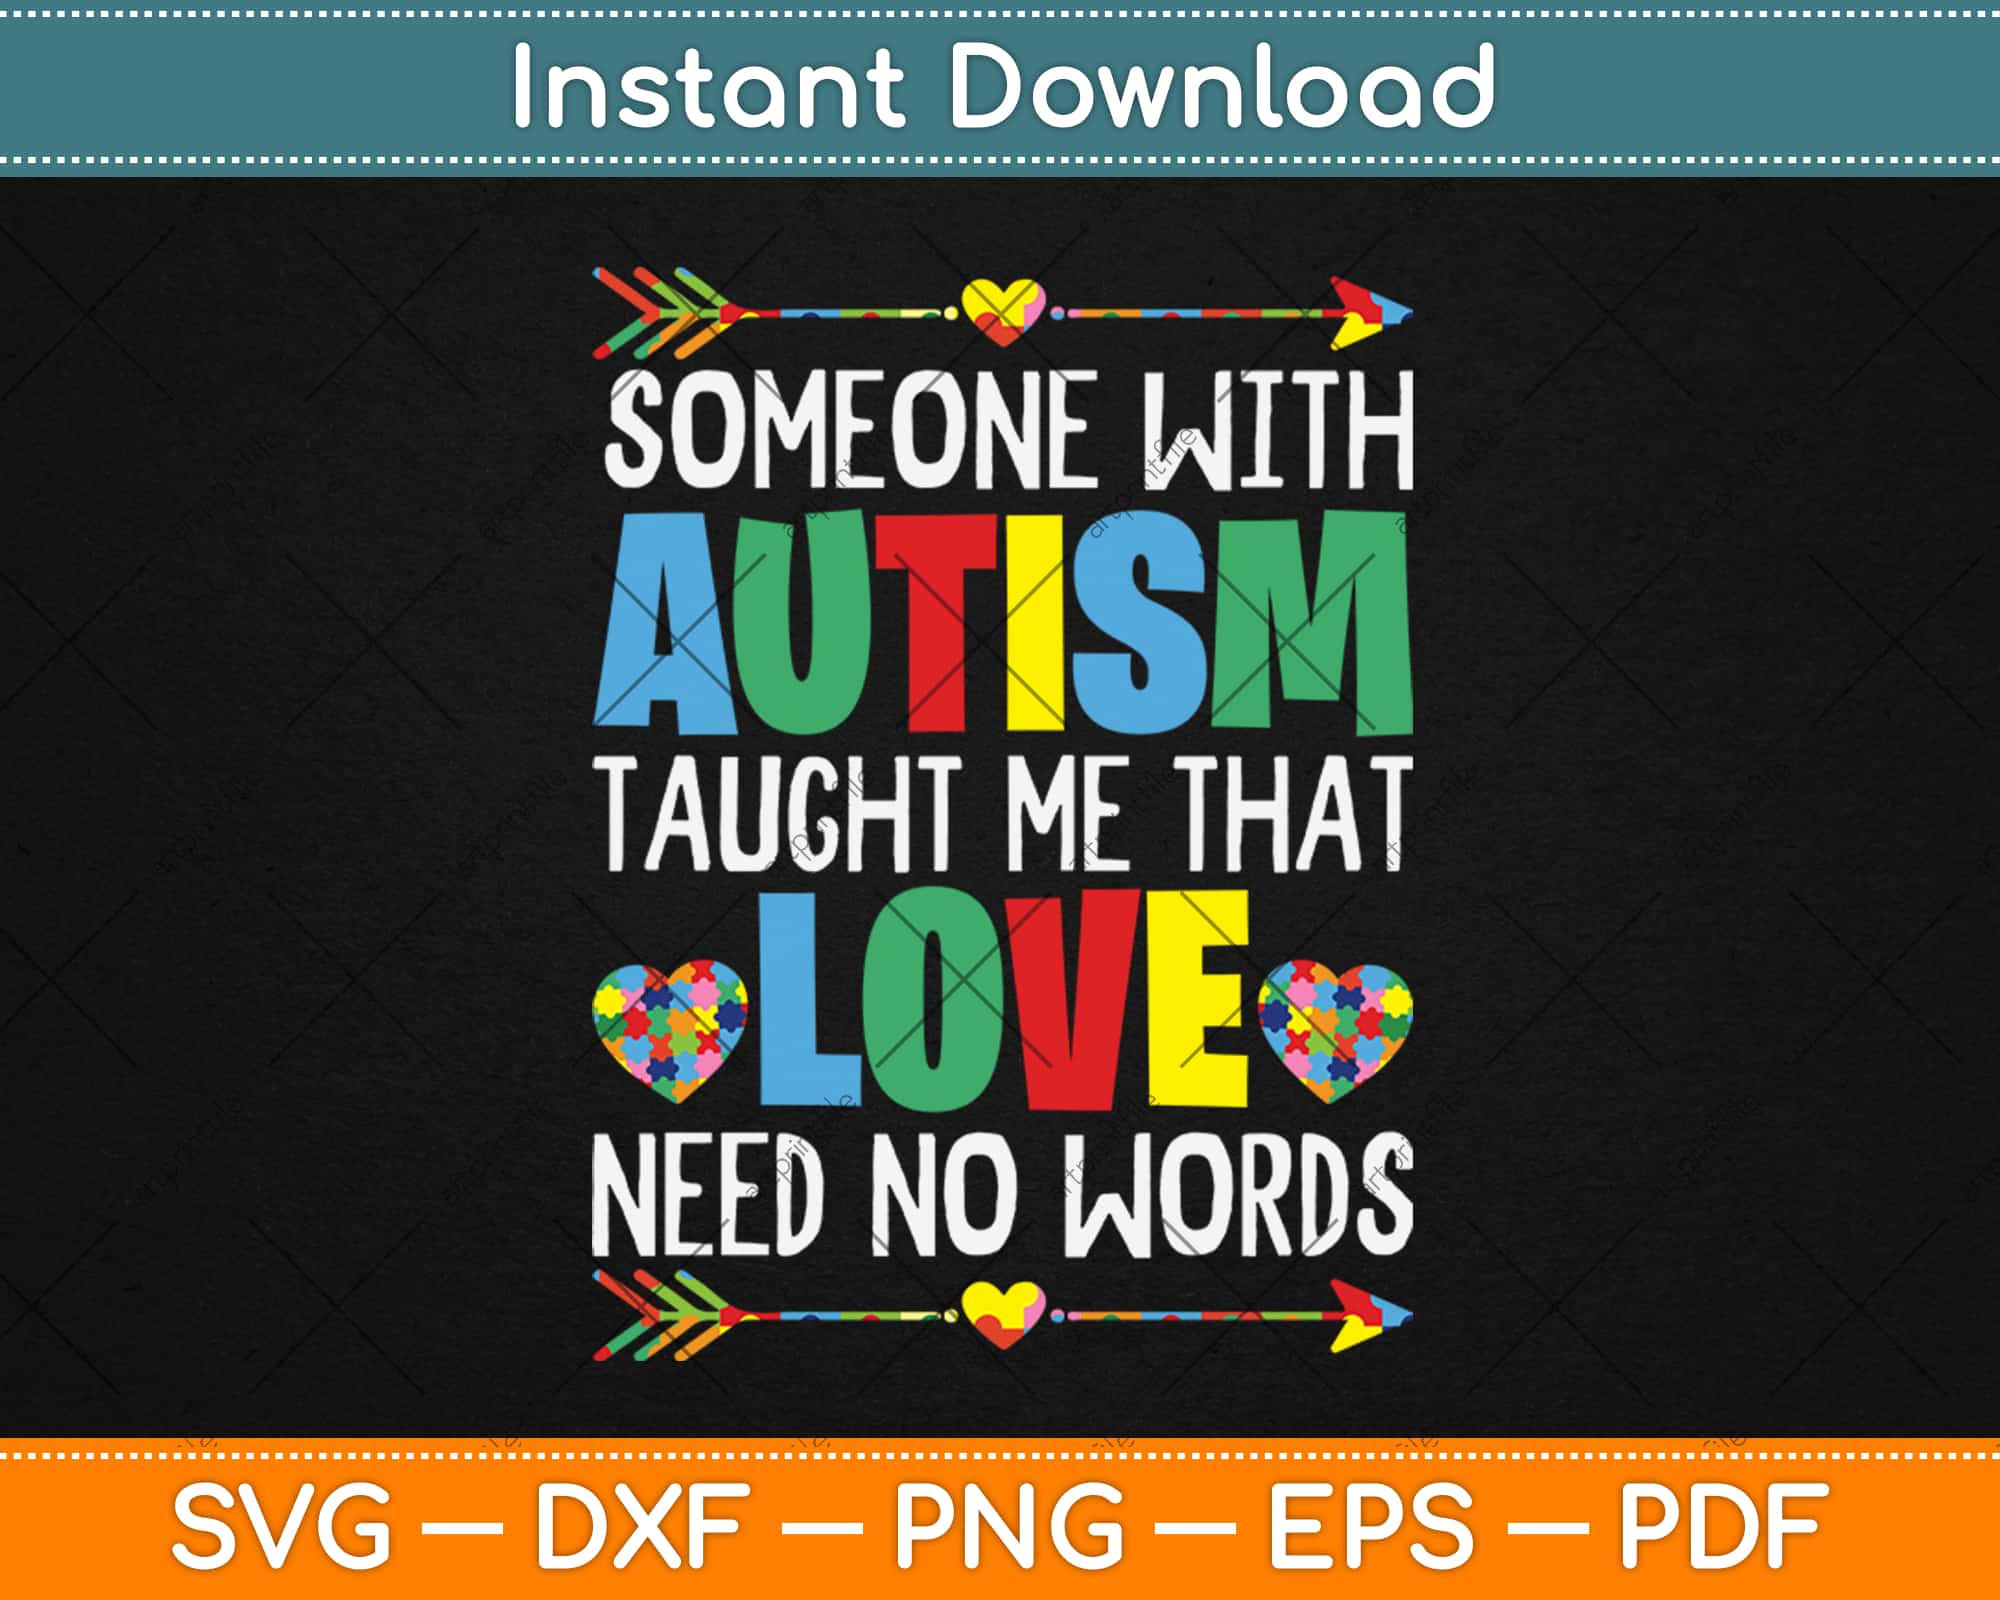 Someone With Autism Has Taught Me Love Needs No Words, PDF Poster  Downloads